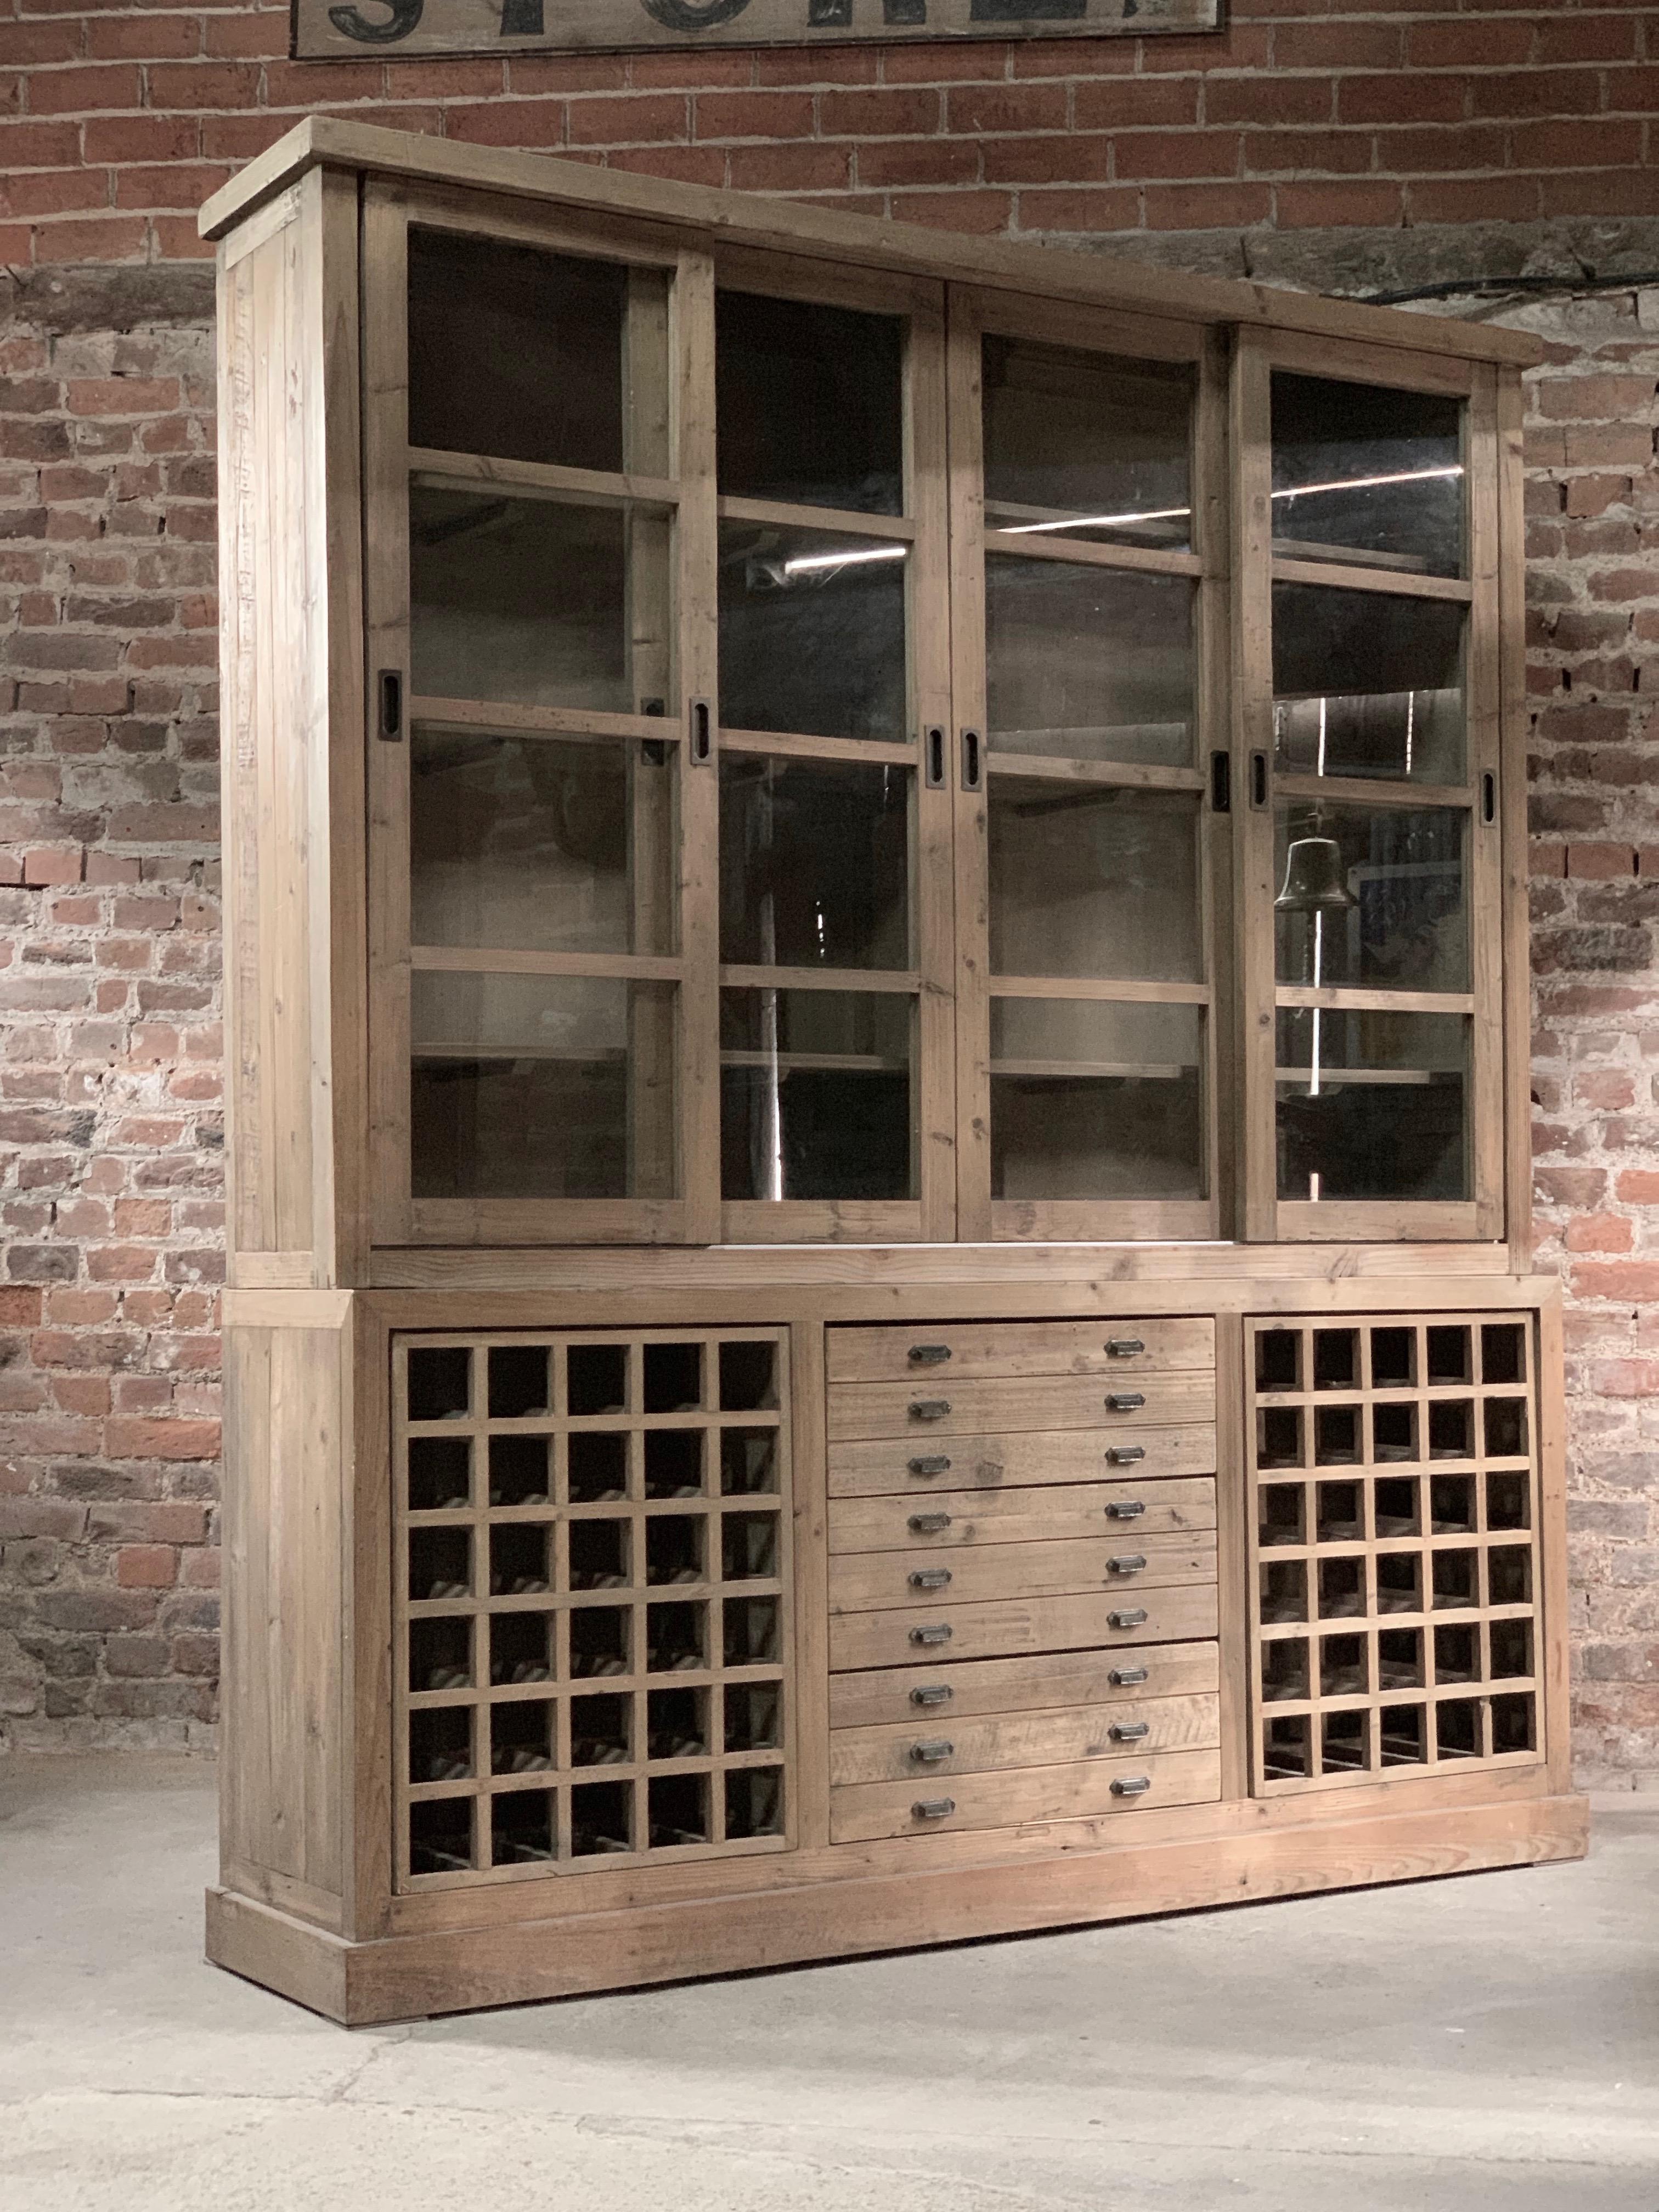 Large Haberdashery kitchen display cabinet pantry solid pine, 20th century

Fabulous large rustic haberdashers style pine display cabinet late twentieth century, the upper section with four tall sliding glazed cabinet doors with three internal